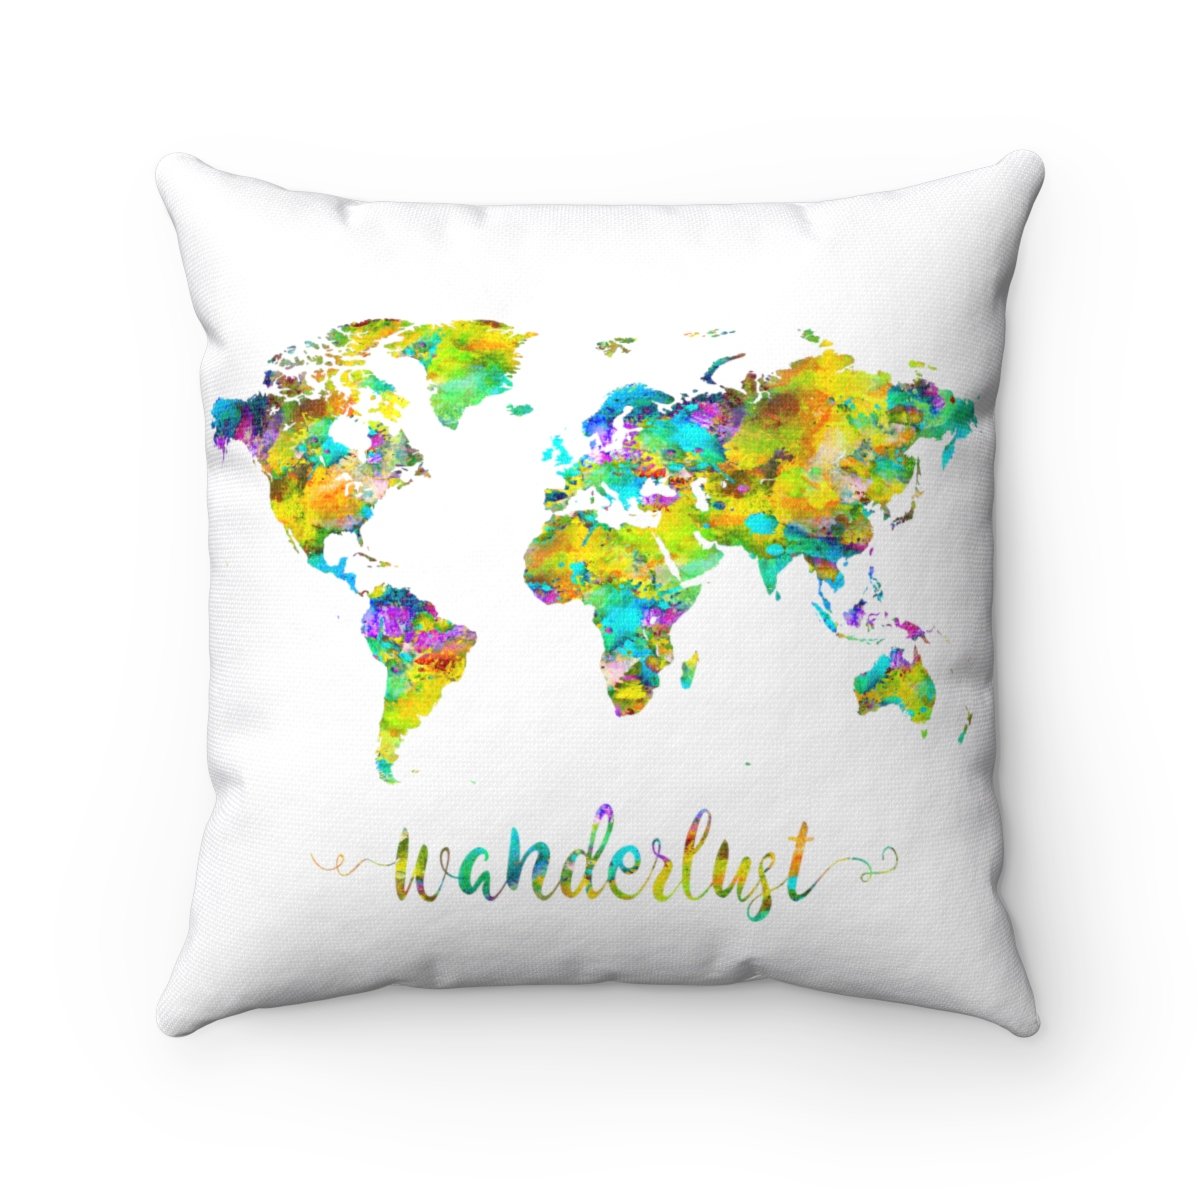 Map Art Square Pillows